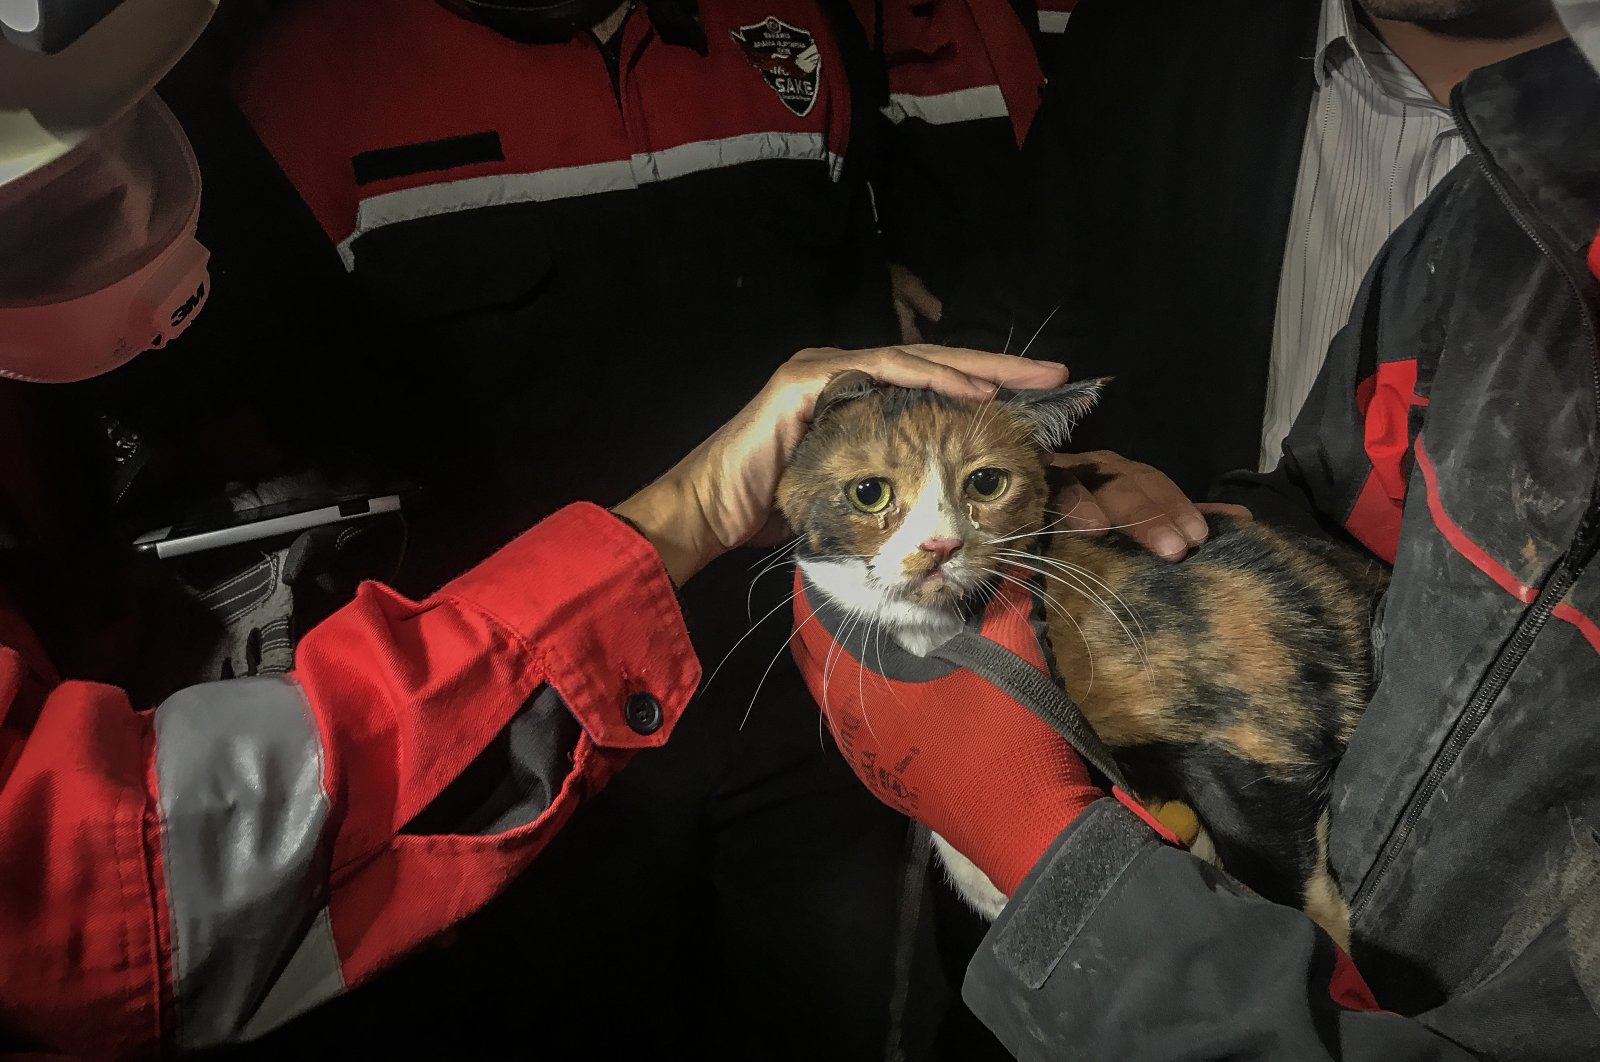 A cat was rescued from the rubble of Yılmaz Erbek Apartment after 30 hours of search and rescue efforts following an earthquake in Izmir, Turkey, Oct. 31, 2020. (AA Photo)